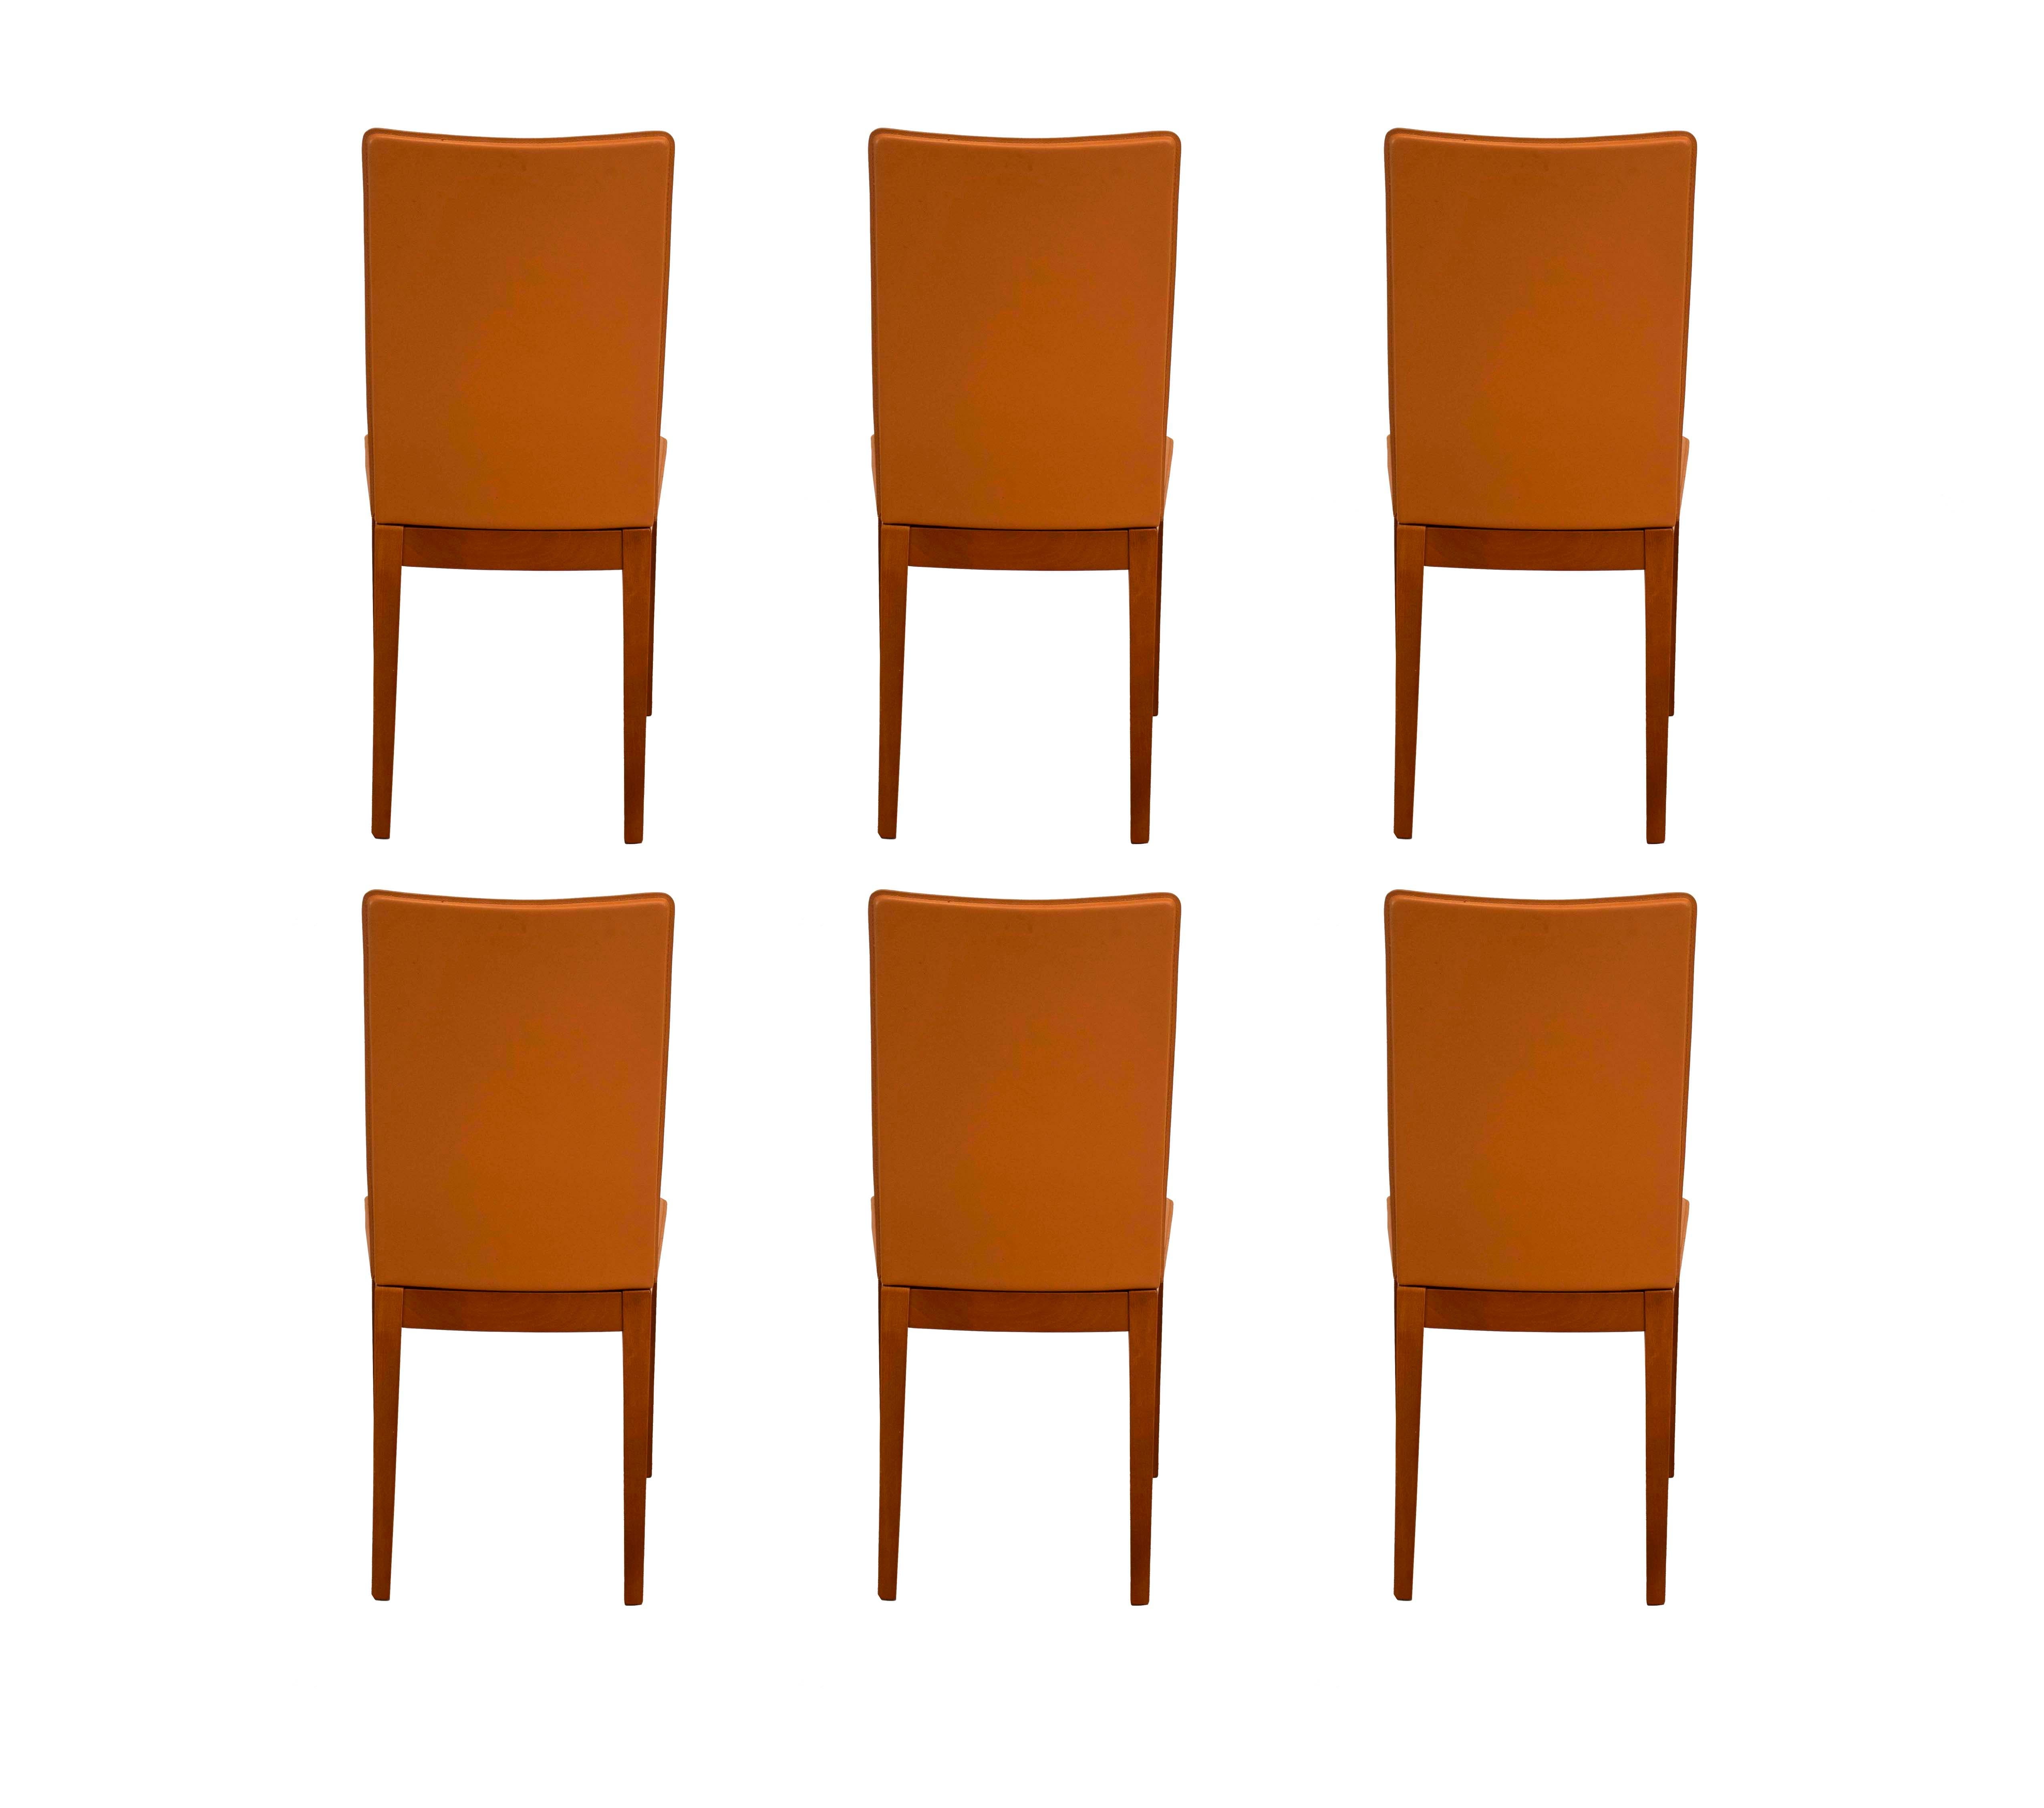 20th Century Set of 6 Calligaris Leather Italian Dining Chairs in Umber Modern Contemporary